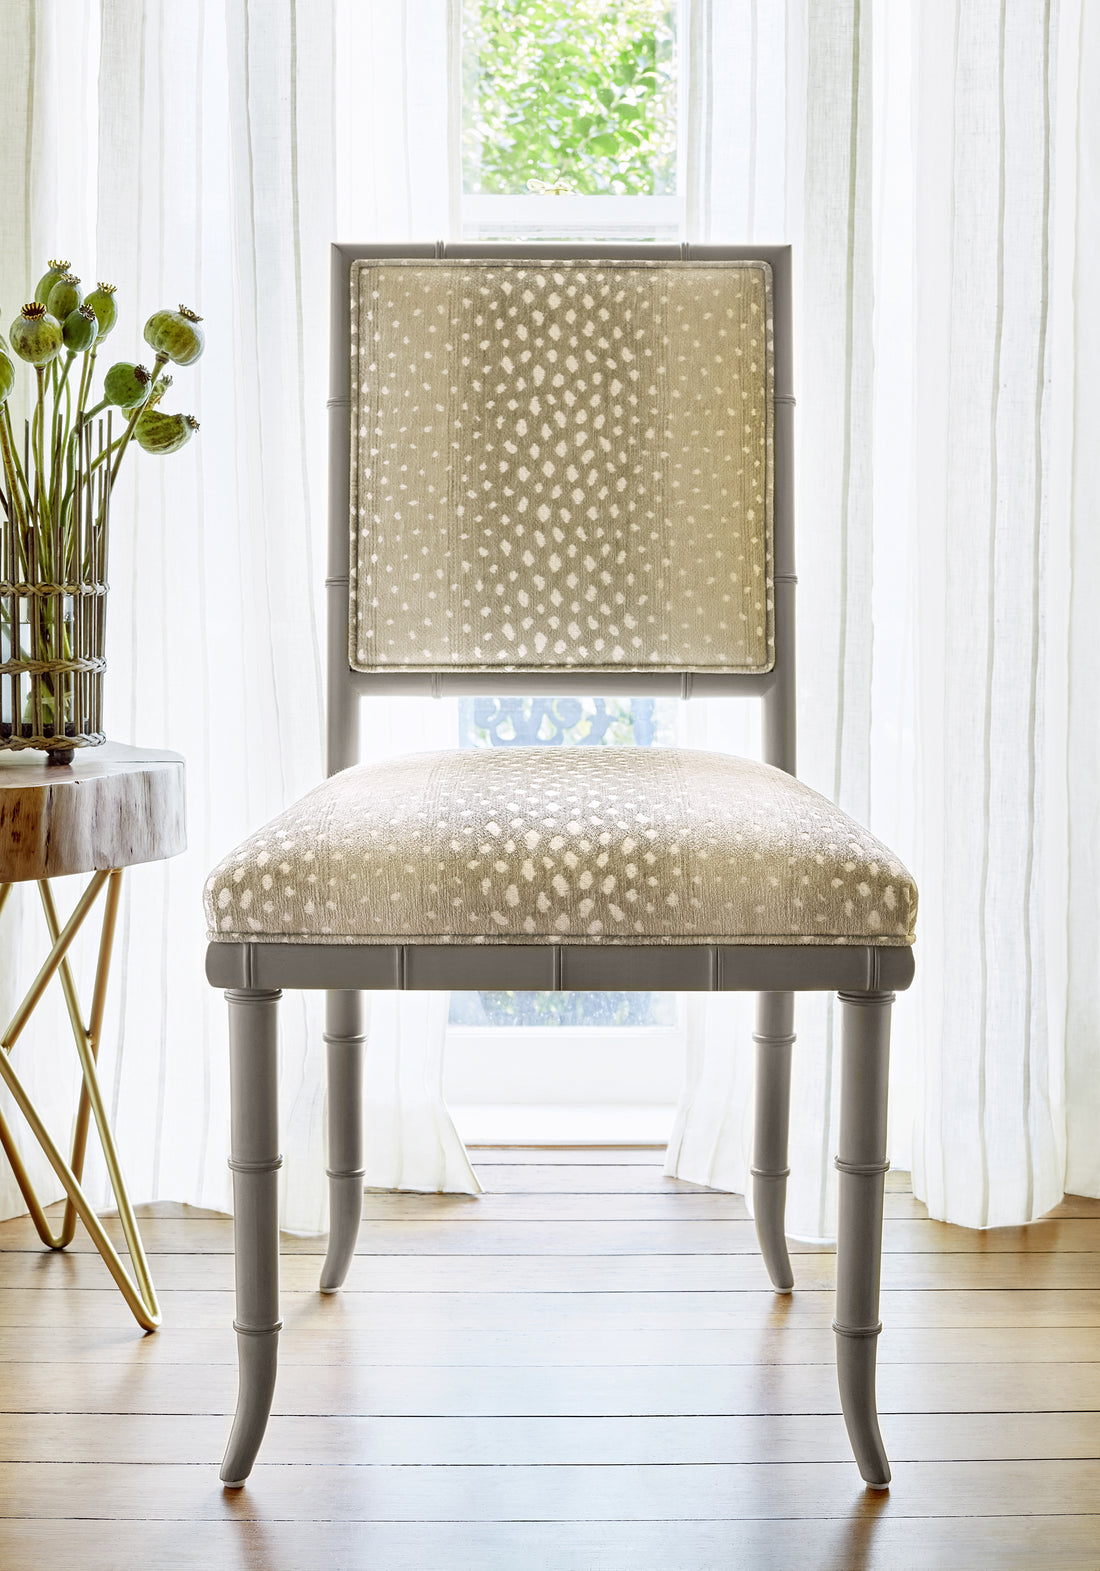 Frontal view of Darien Chair in Gazelle woven fabric in linen color - pattern number W80430 - by Thibaut in the Woven Resource Vol 10 Menagerie collection